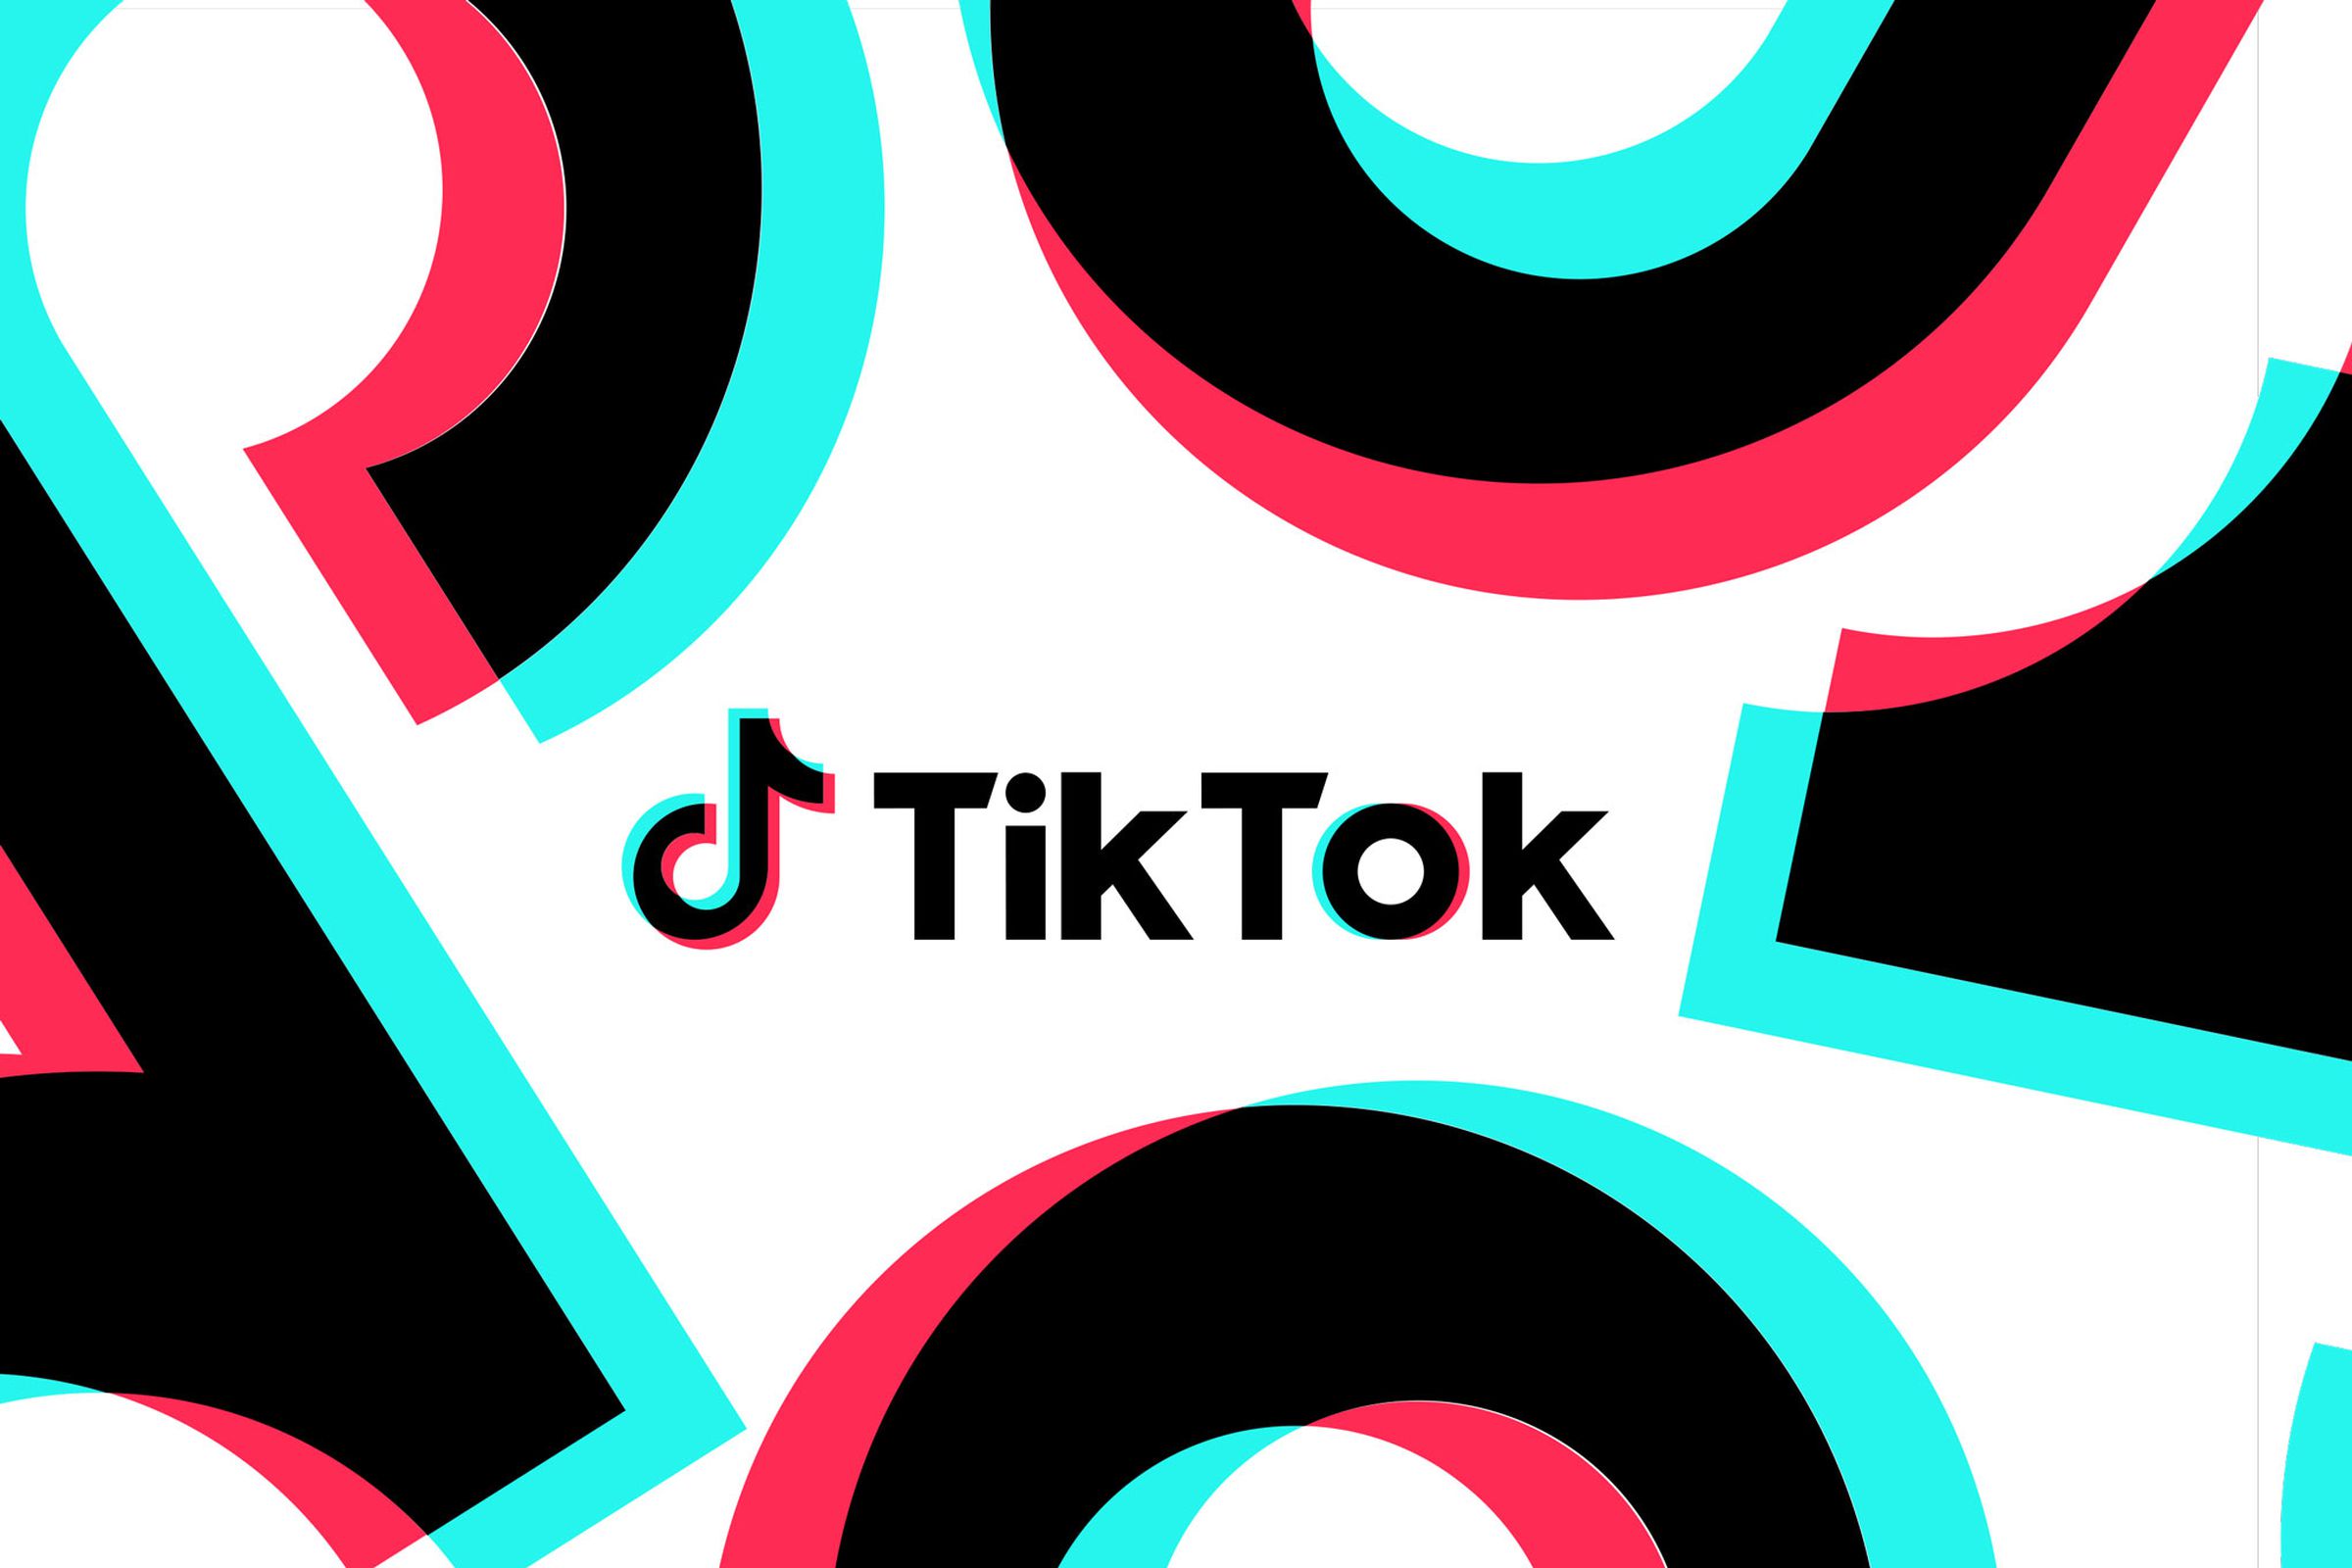 The image shows the TikTok logo superimposed on a white background.